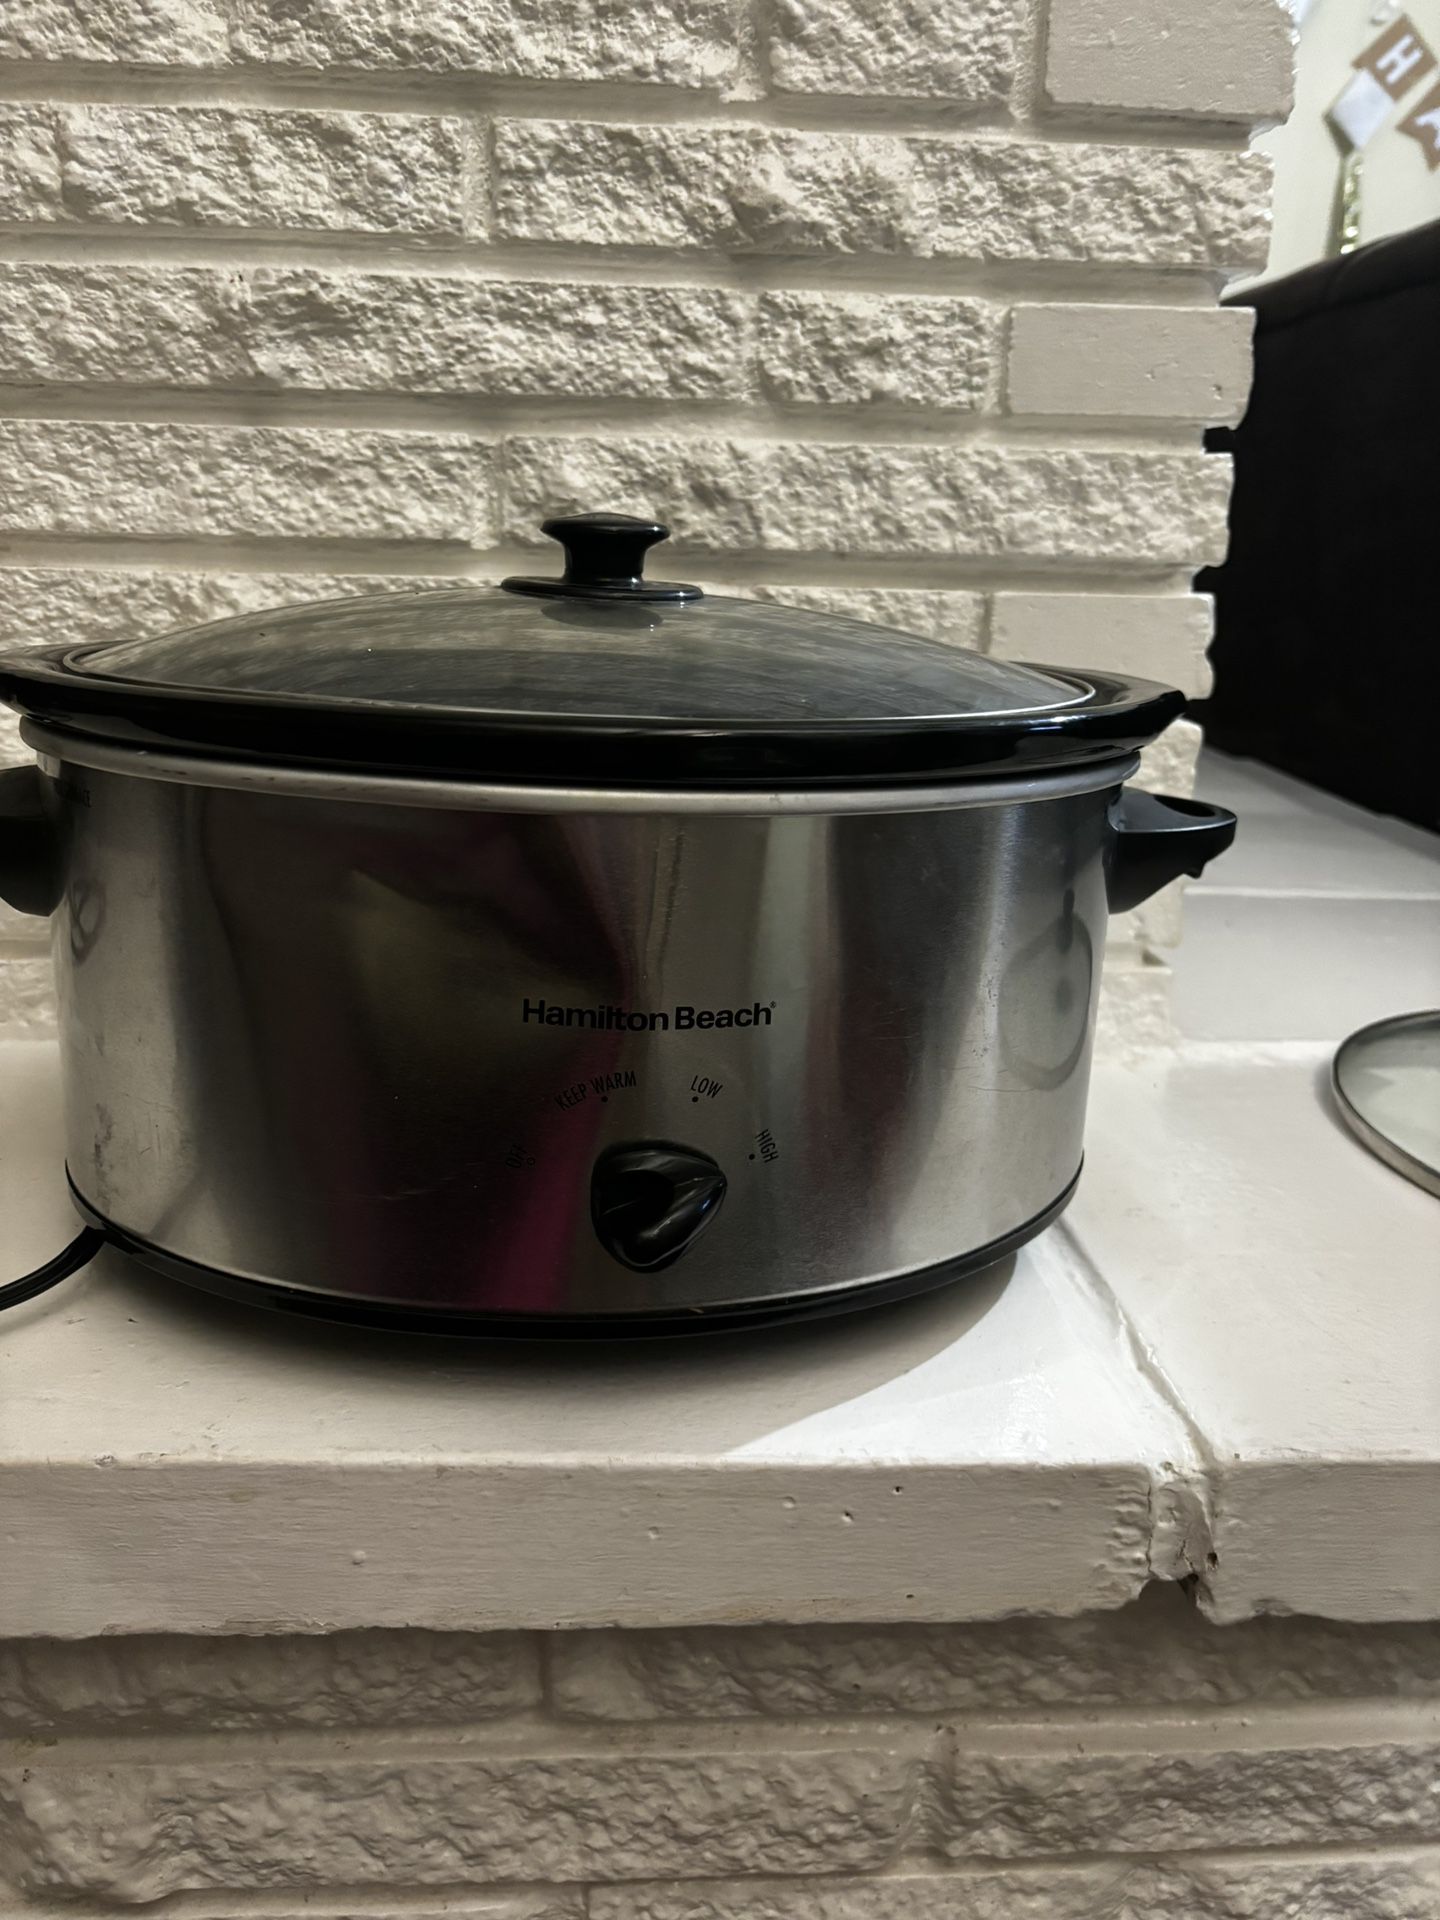 6 Quart Slow Cooker Hamiltan beach working perfectly small dent outside